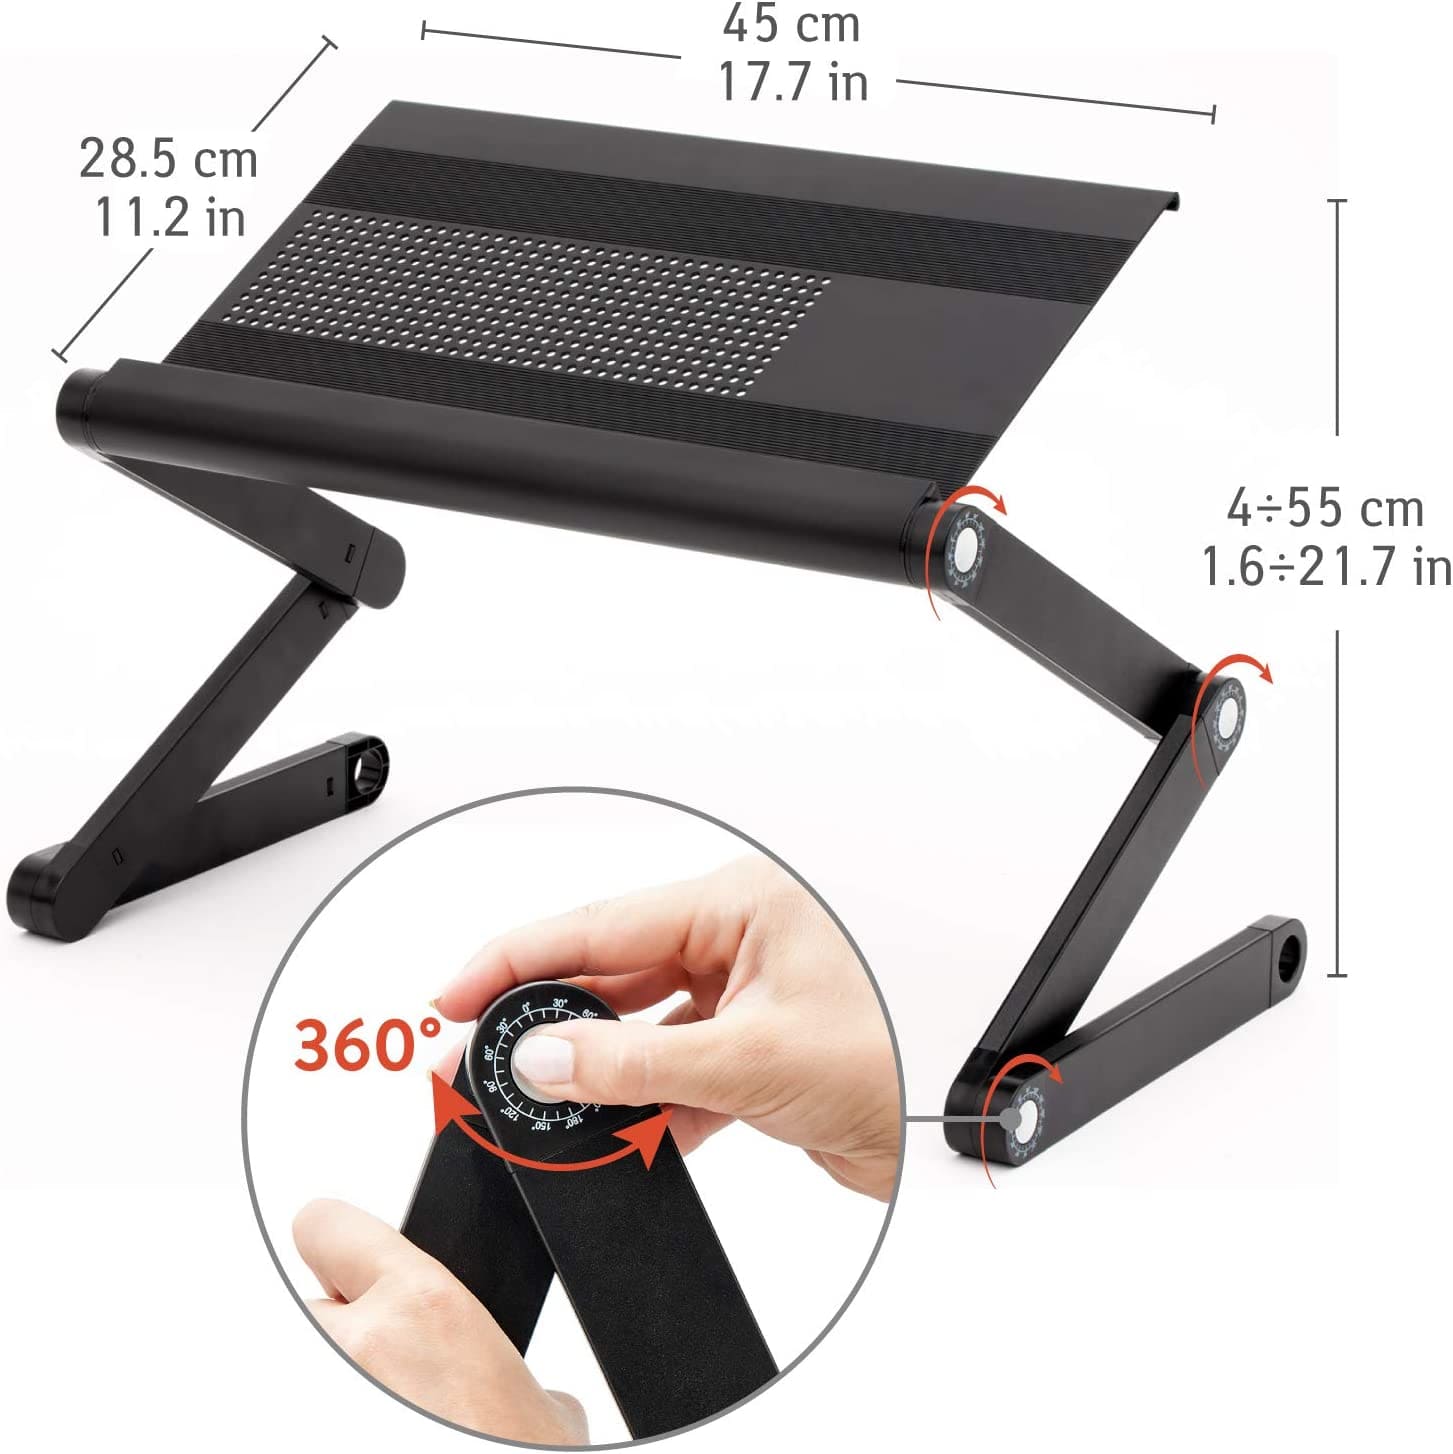 Laptop Stand, Laptop Stand for Bed, Adjustable Laptop Stand, Folding Laptop Stand, Cooling Tray, WonderWorker Nobel, 4